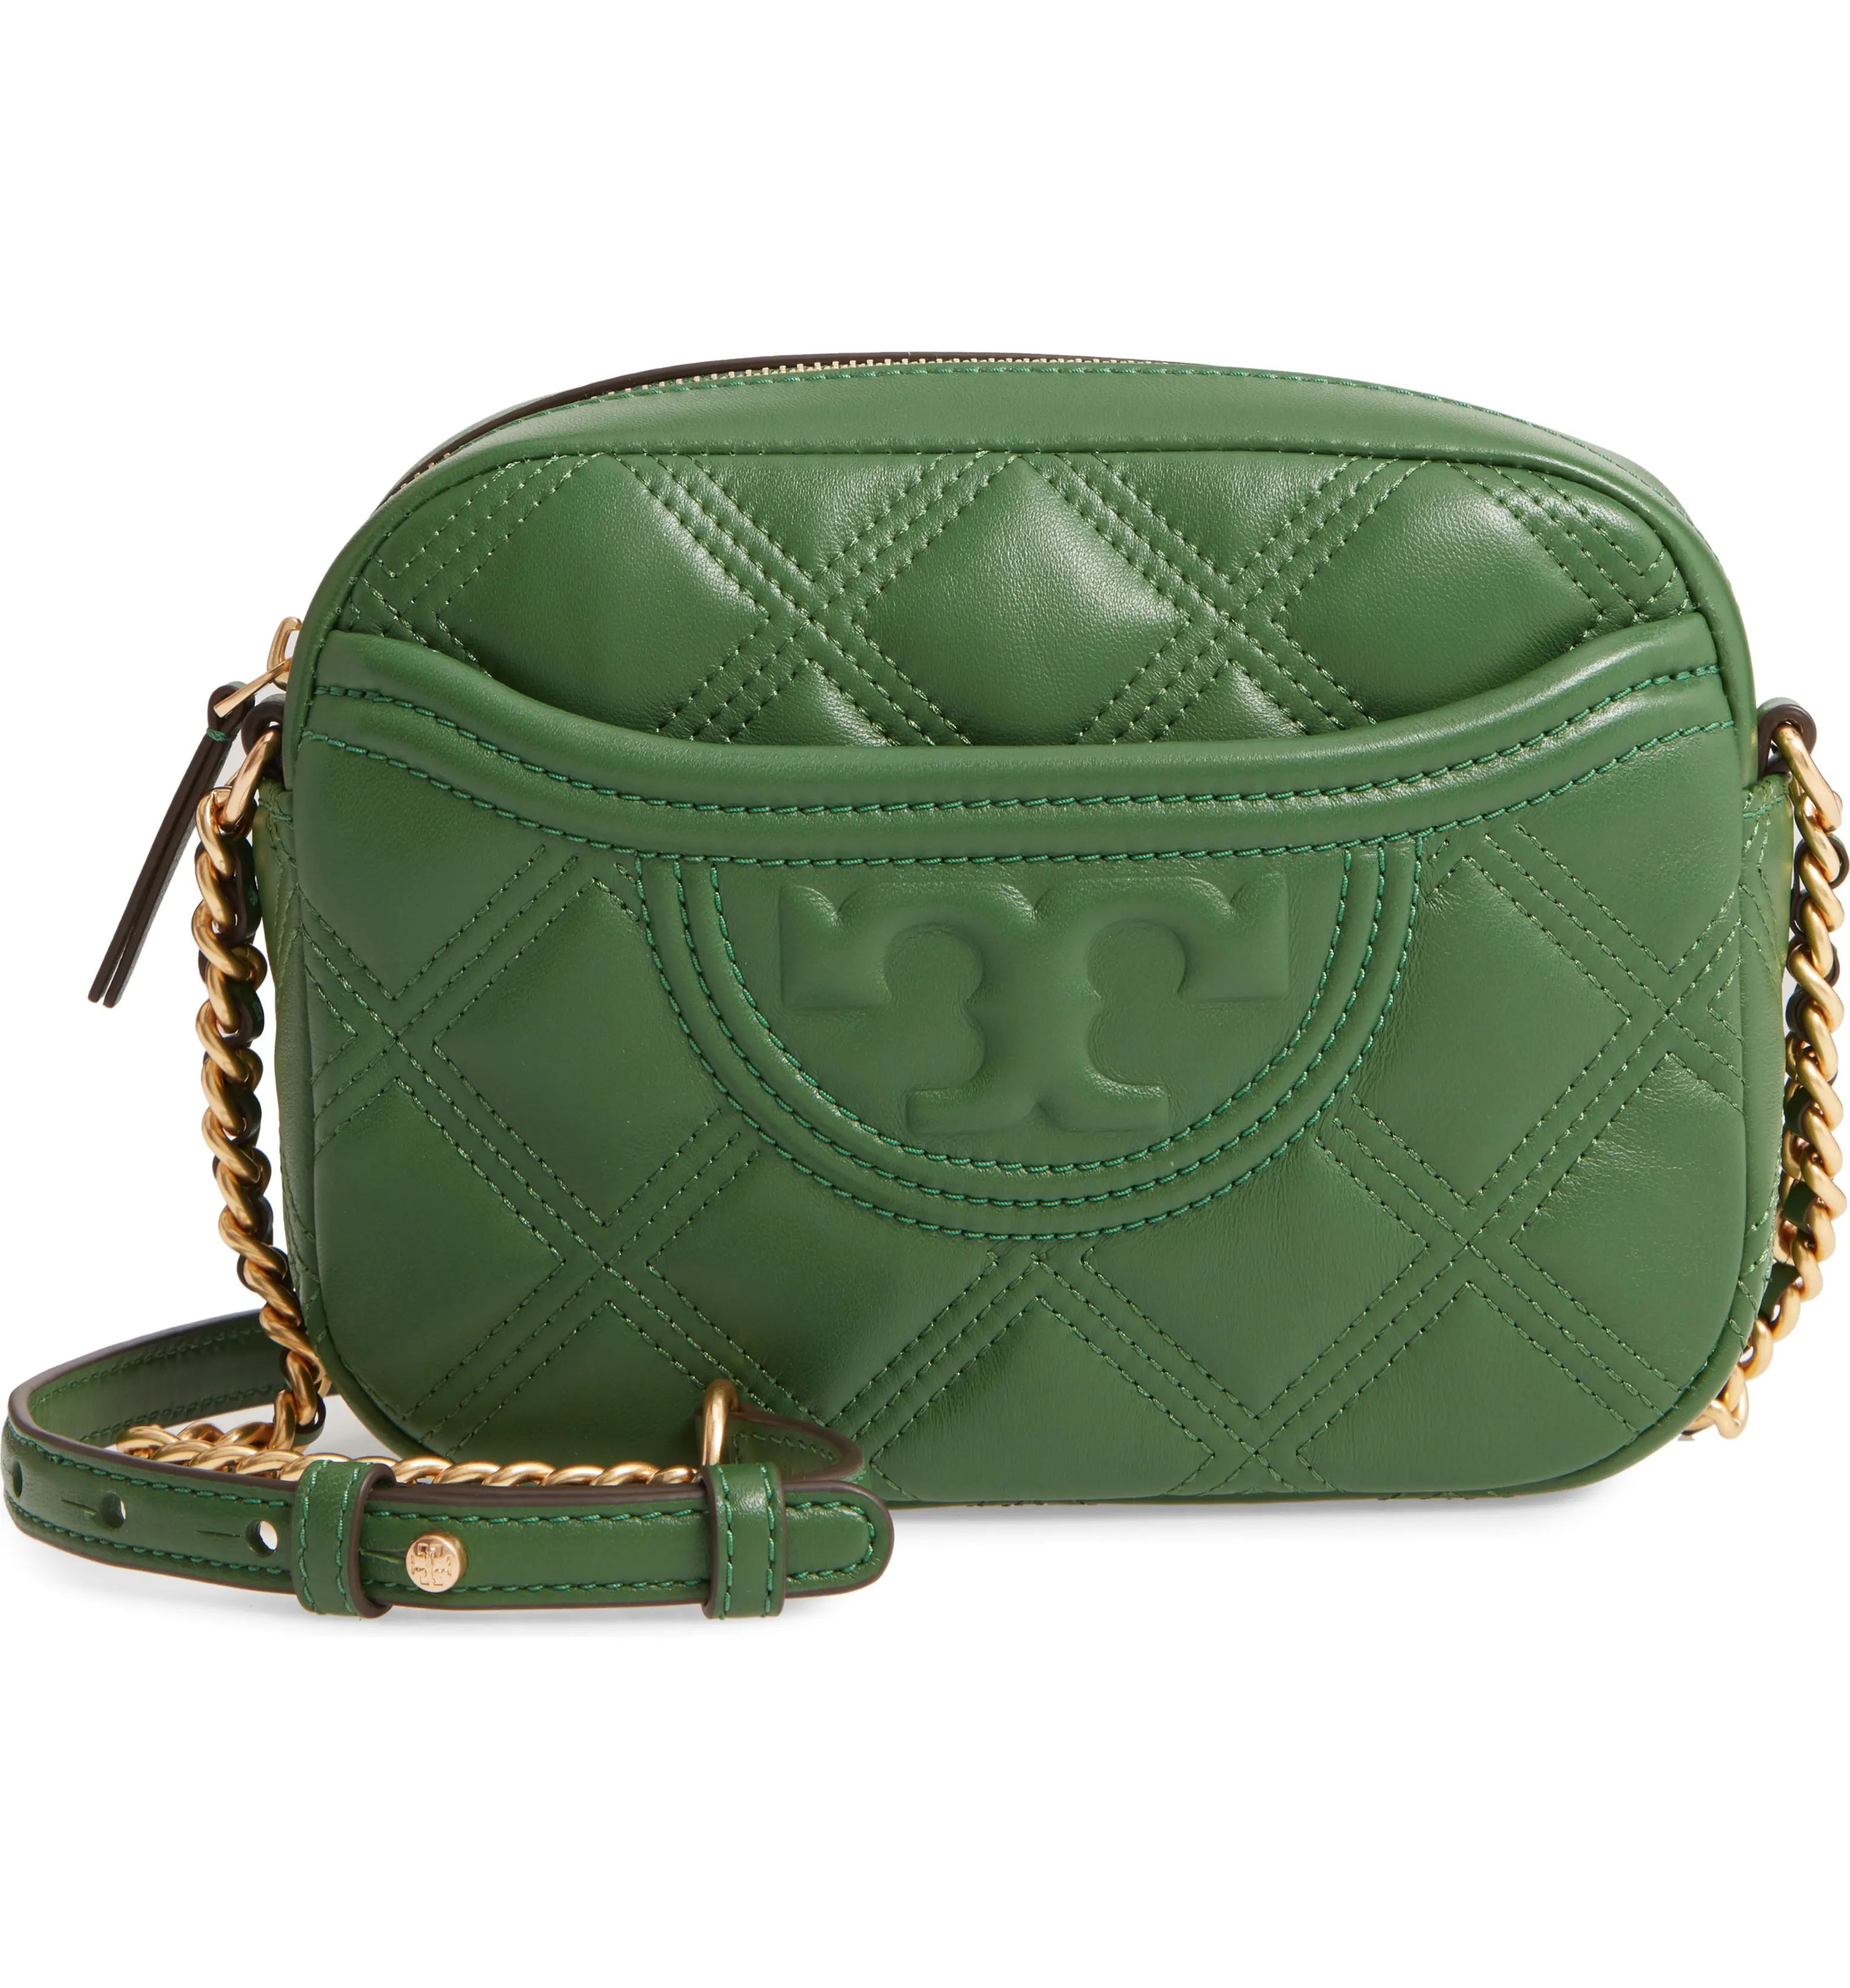 Fleming Quilted Leather Camera Bag | Nordstrom